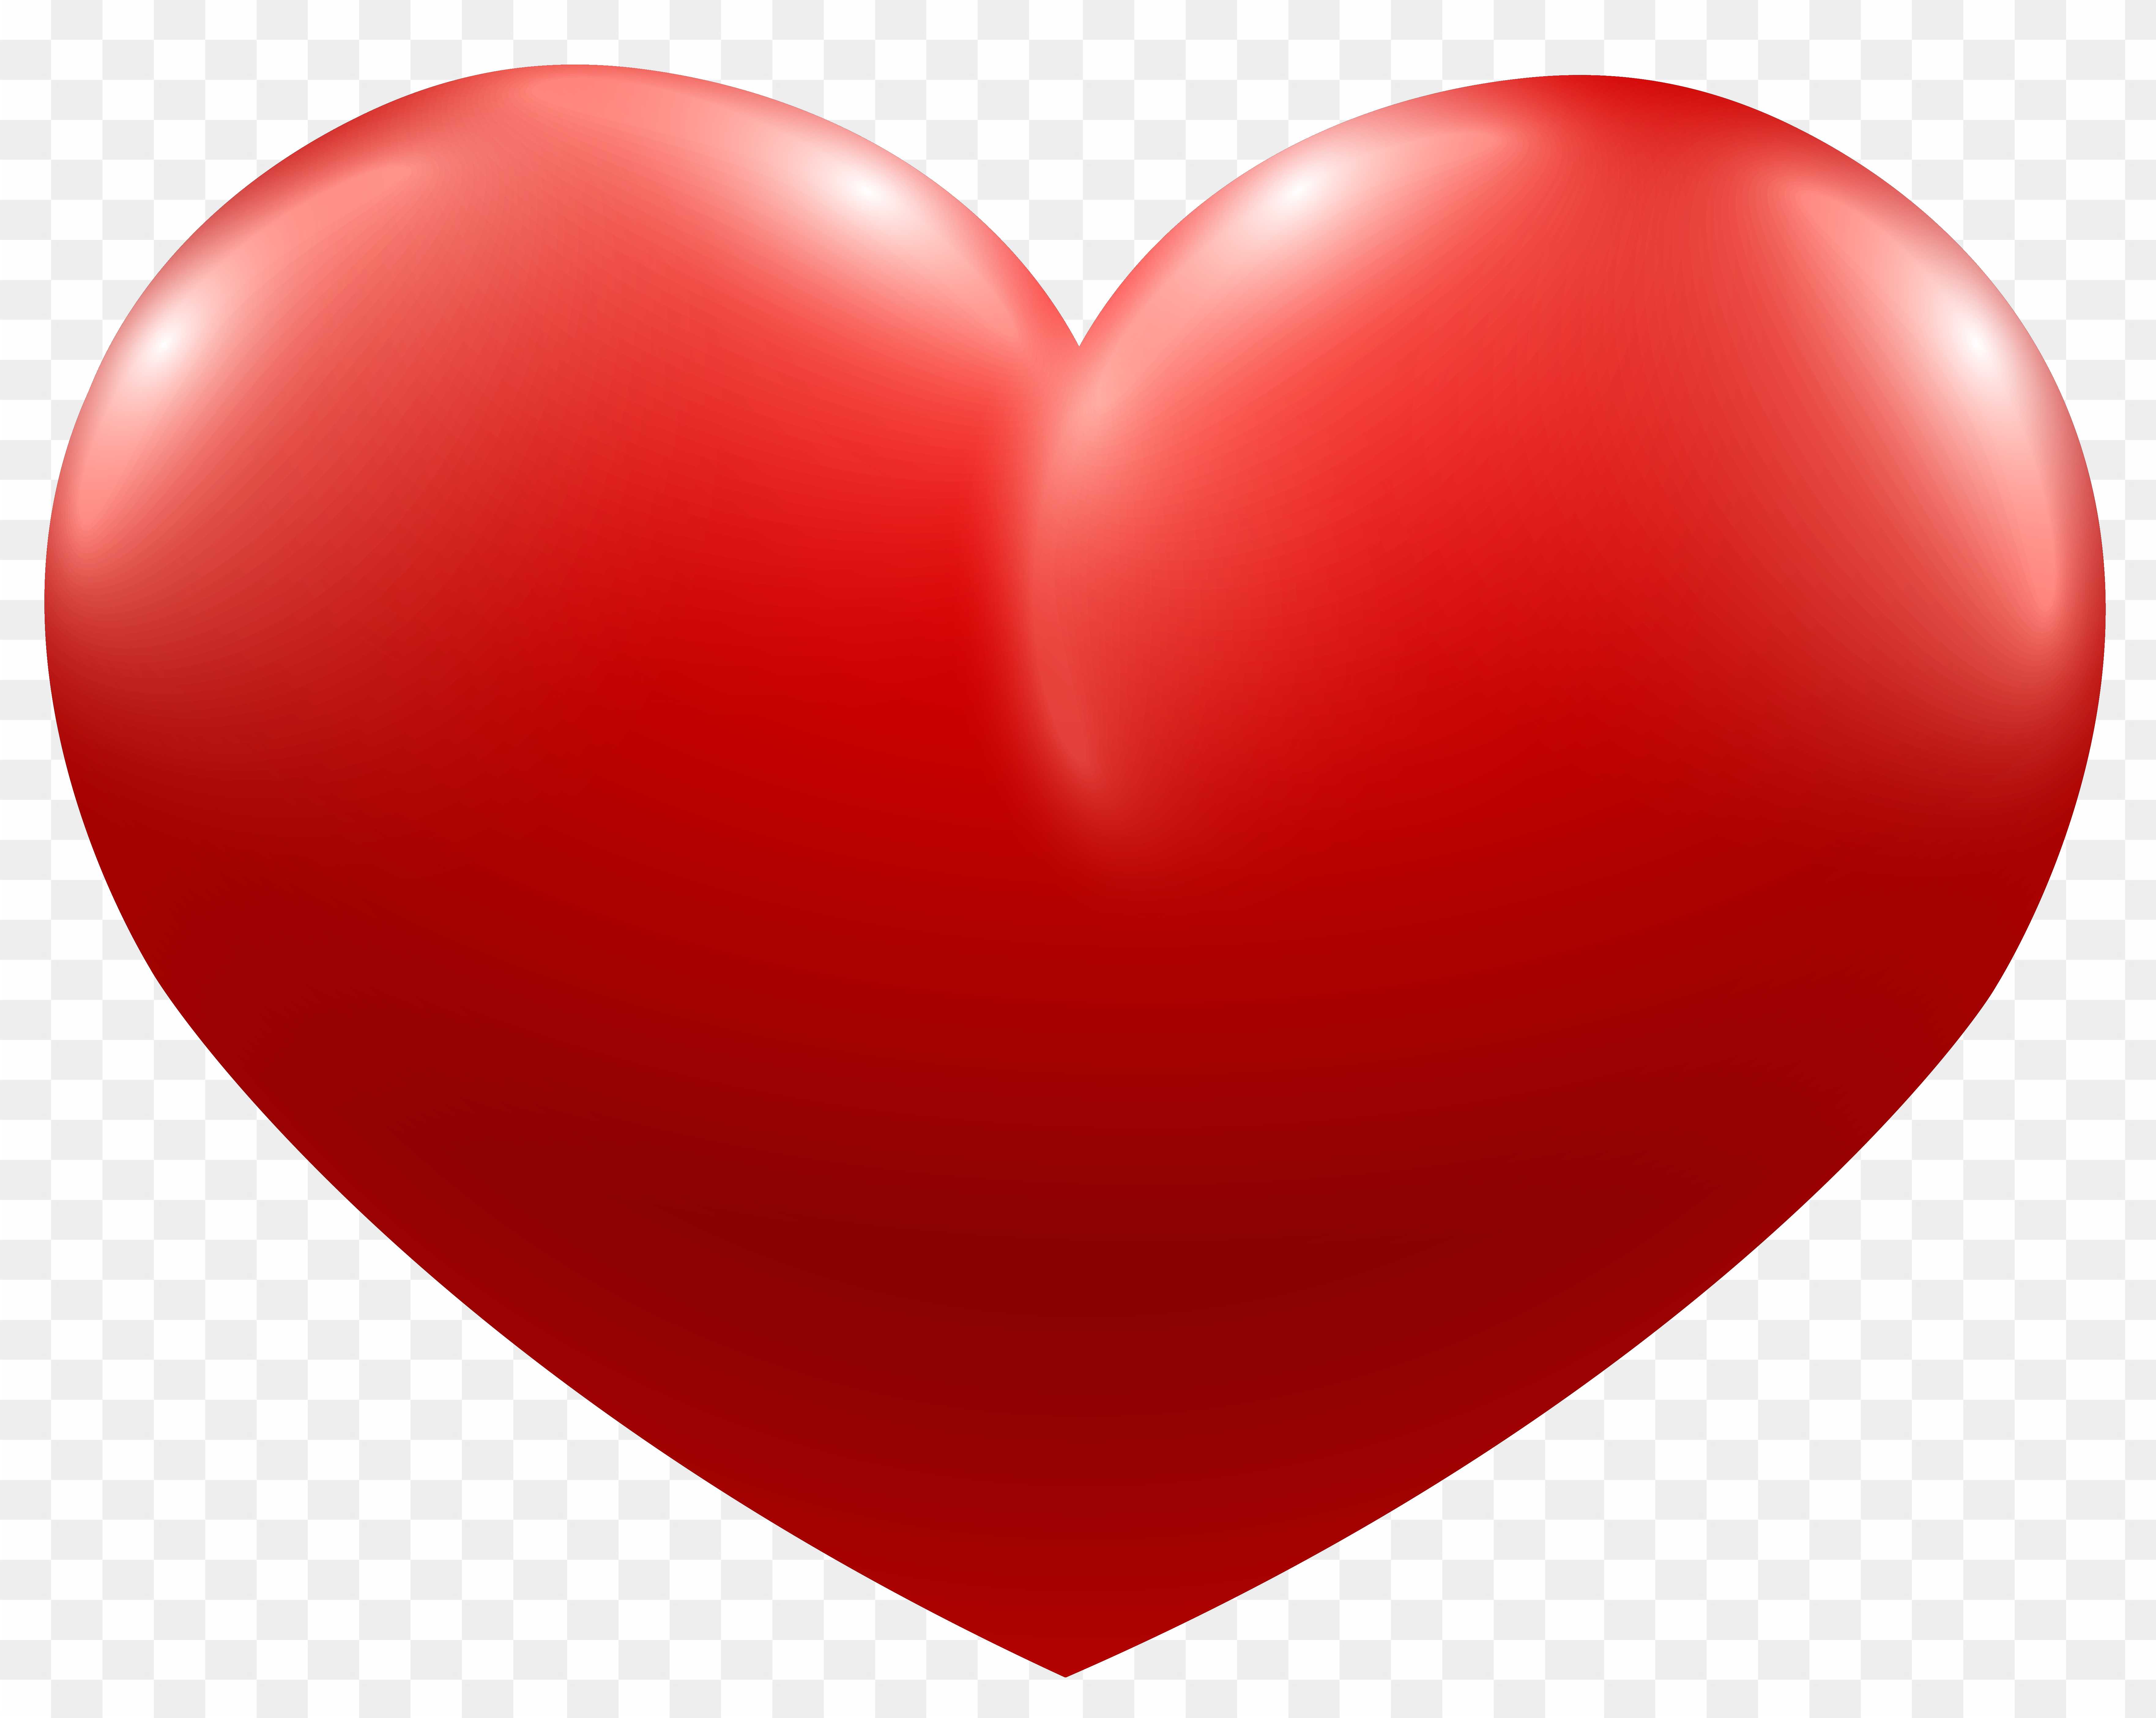 dil photo - Google Search | Heart frame, Photo heart, Valentines